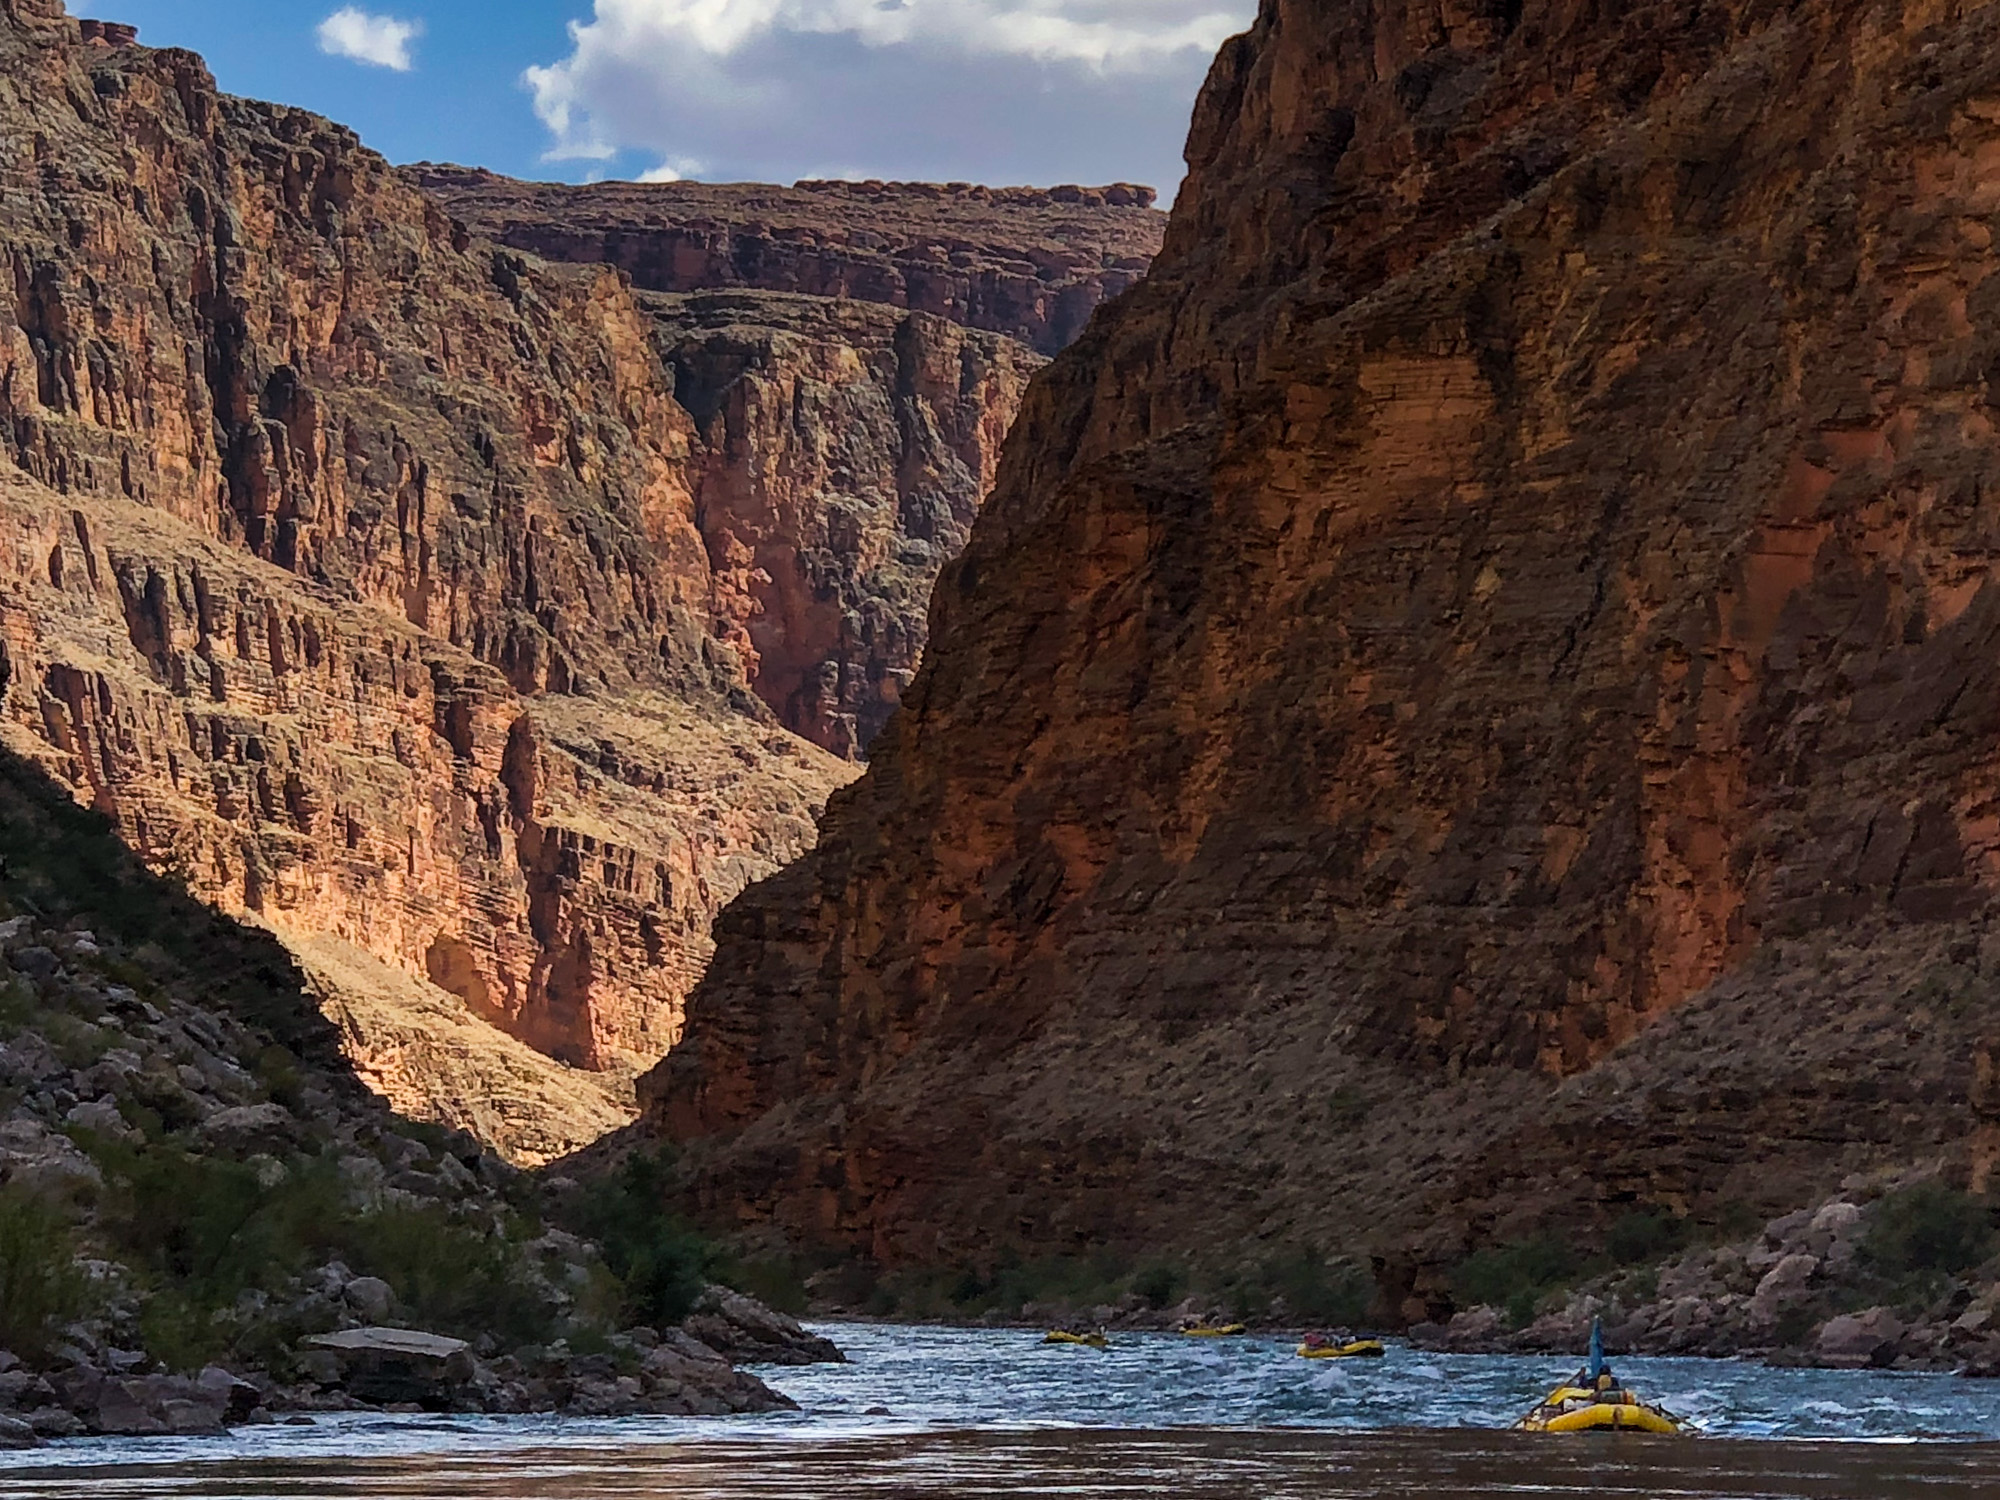  Morning float inside the Grand Canyon  